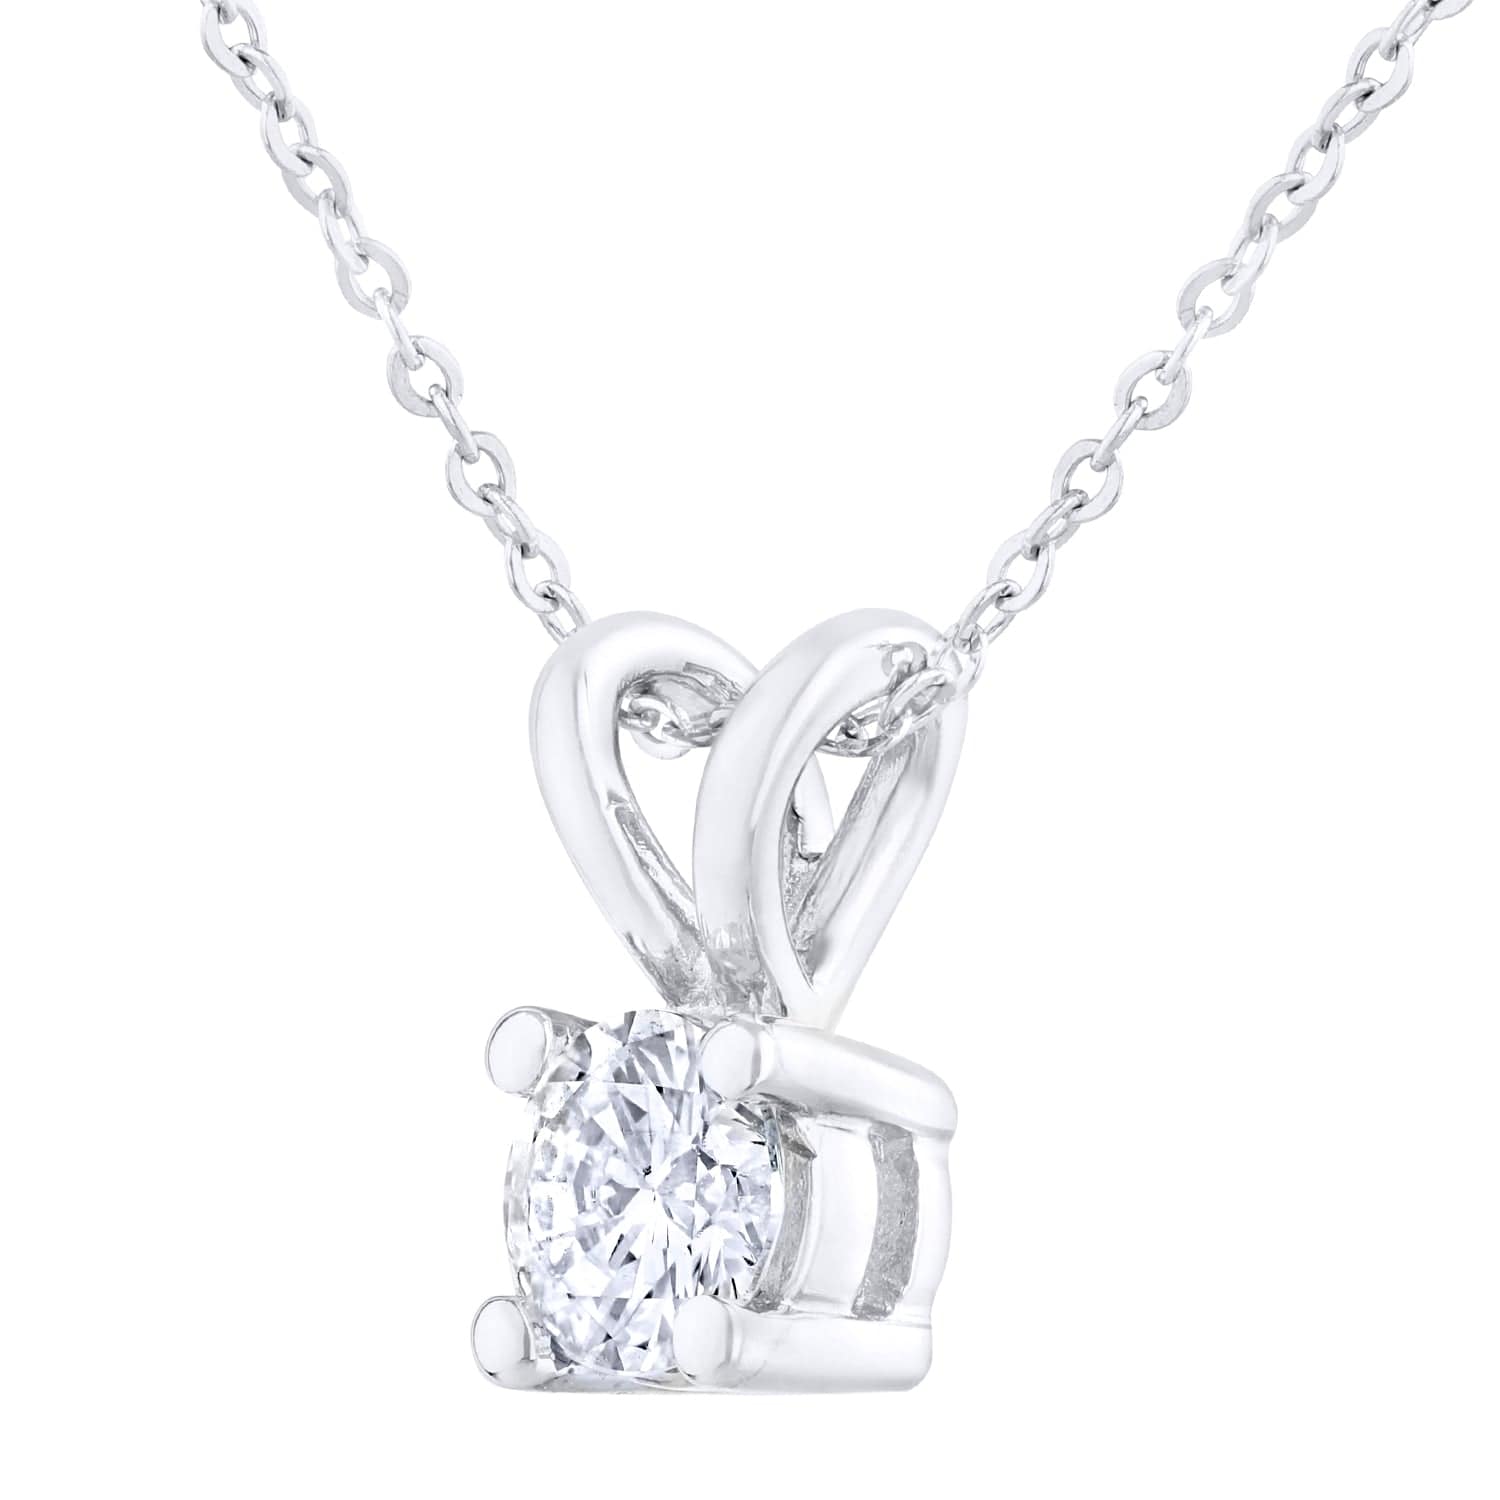 Lynora Luxe Necklace White Gold 9ct / Diamond / 18" 9ct White Gold 0.25ct Solitaire Diamond Pendant Necklace